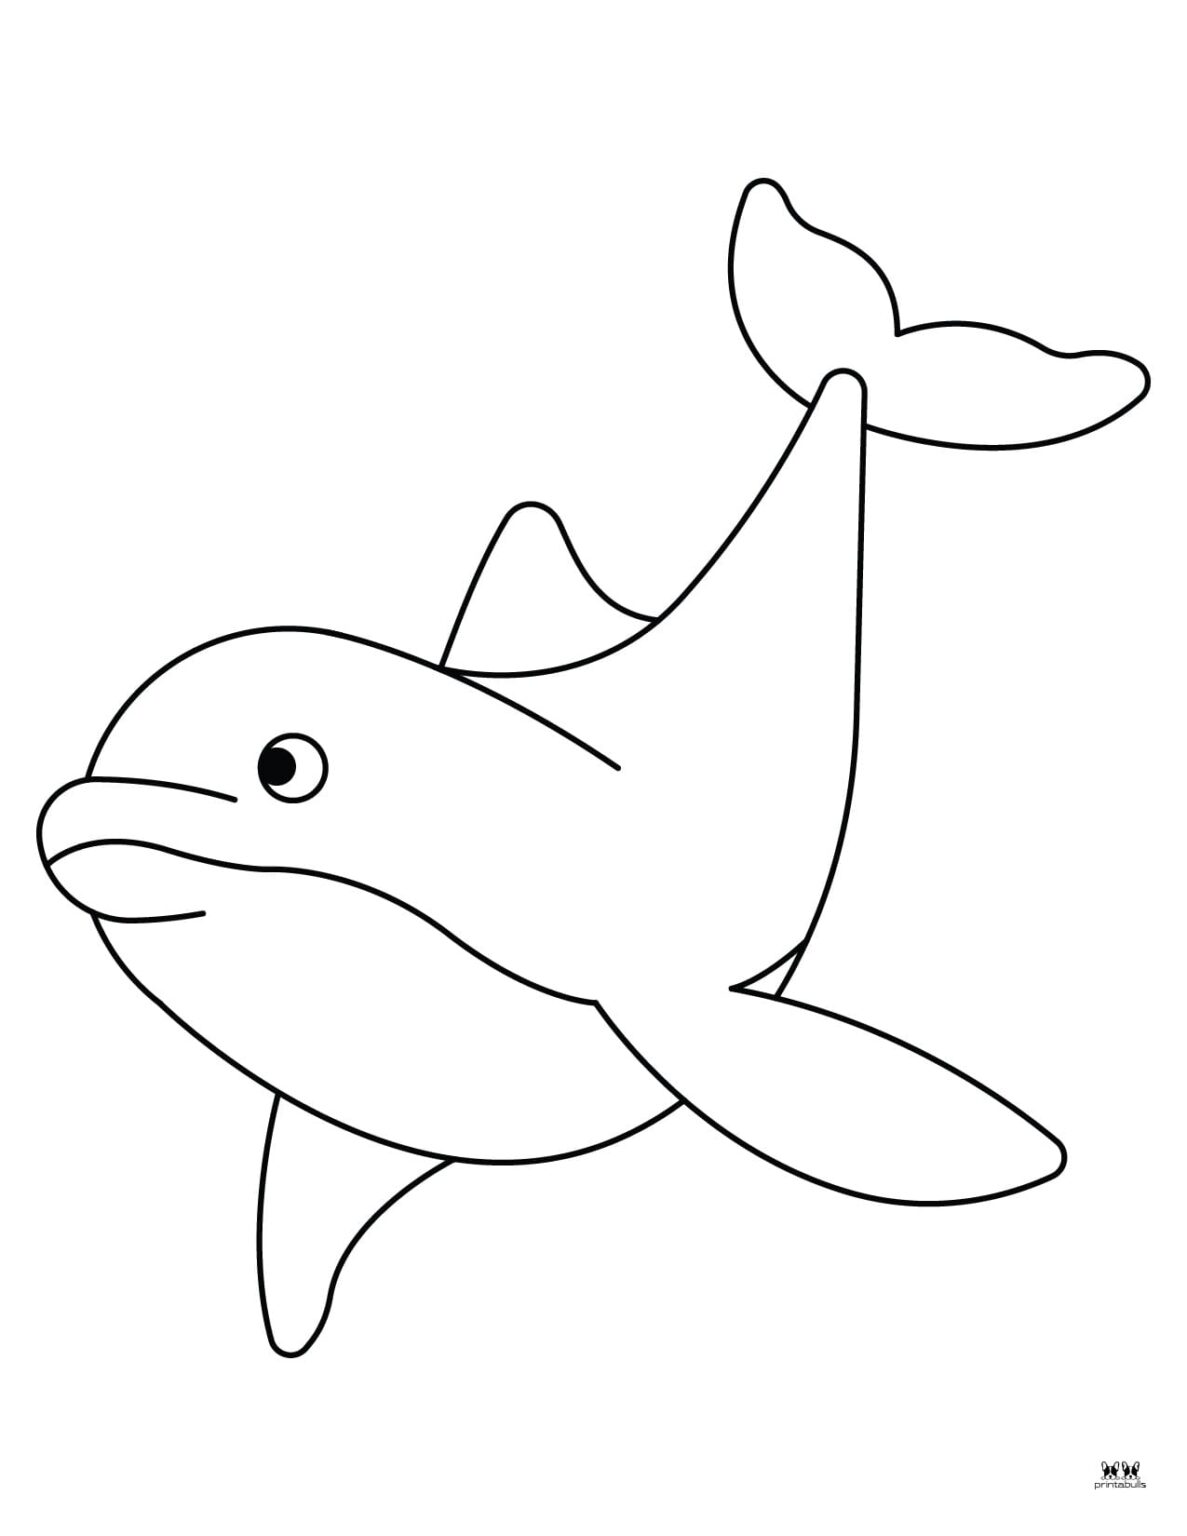 Dolphin Coloring Pages & Templates - 28 FREE Pages | Printabulls